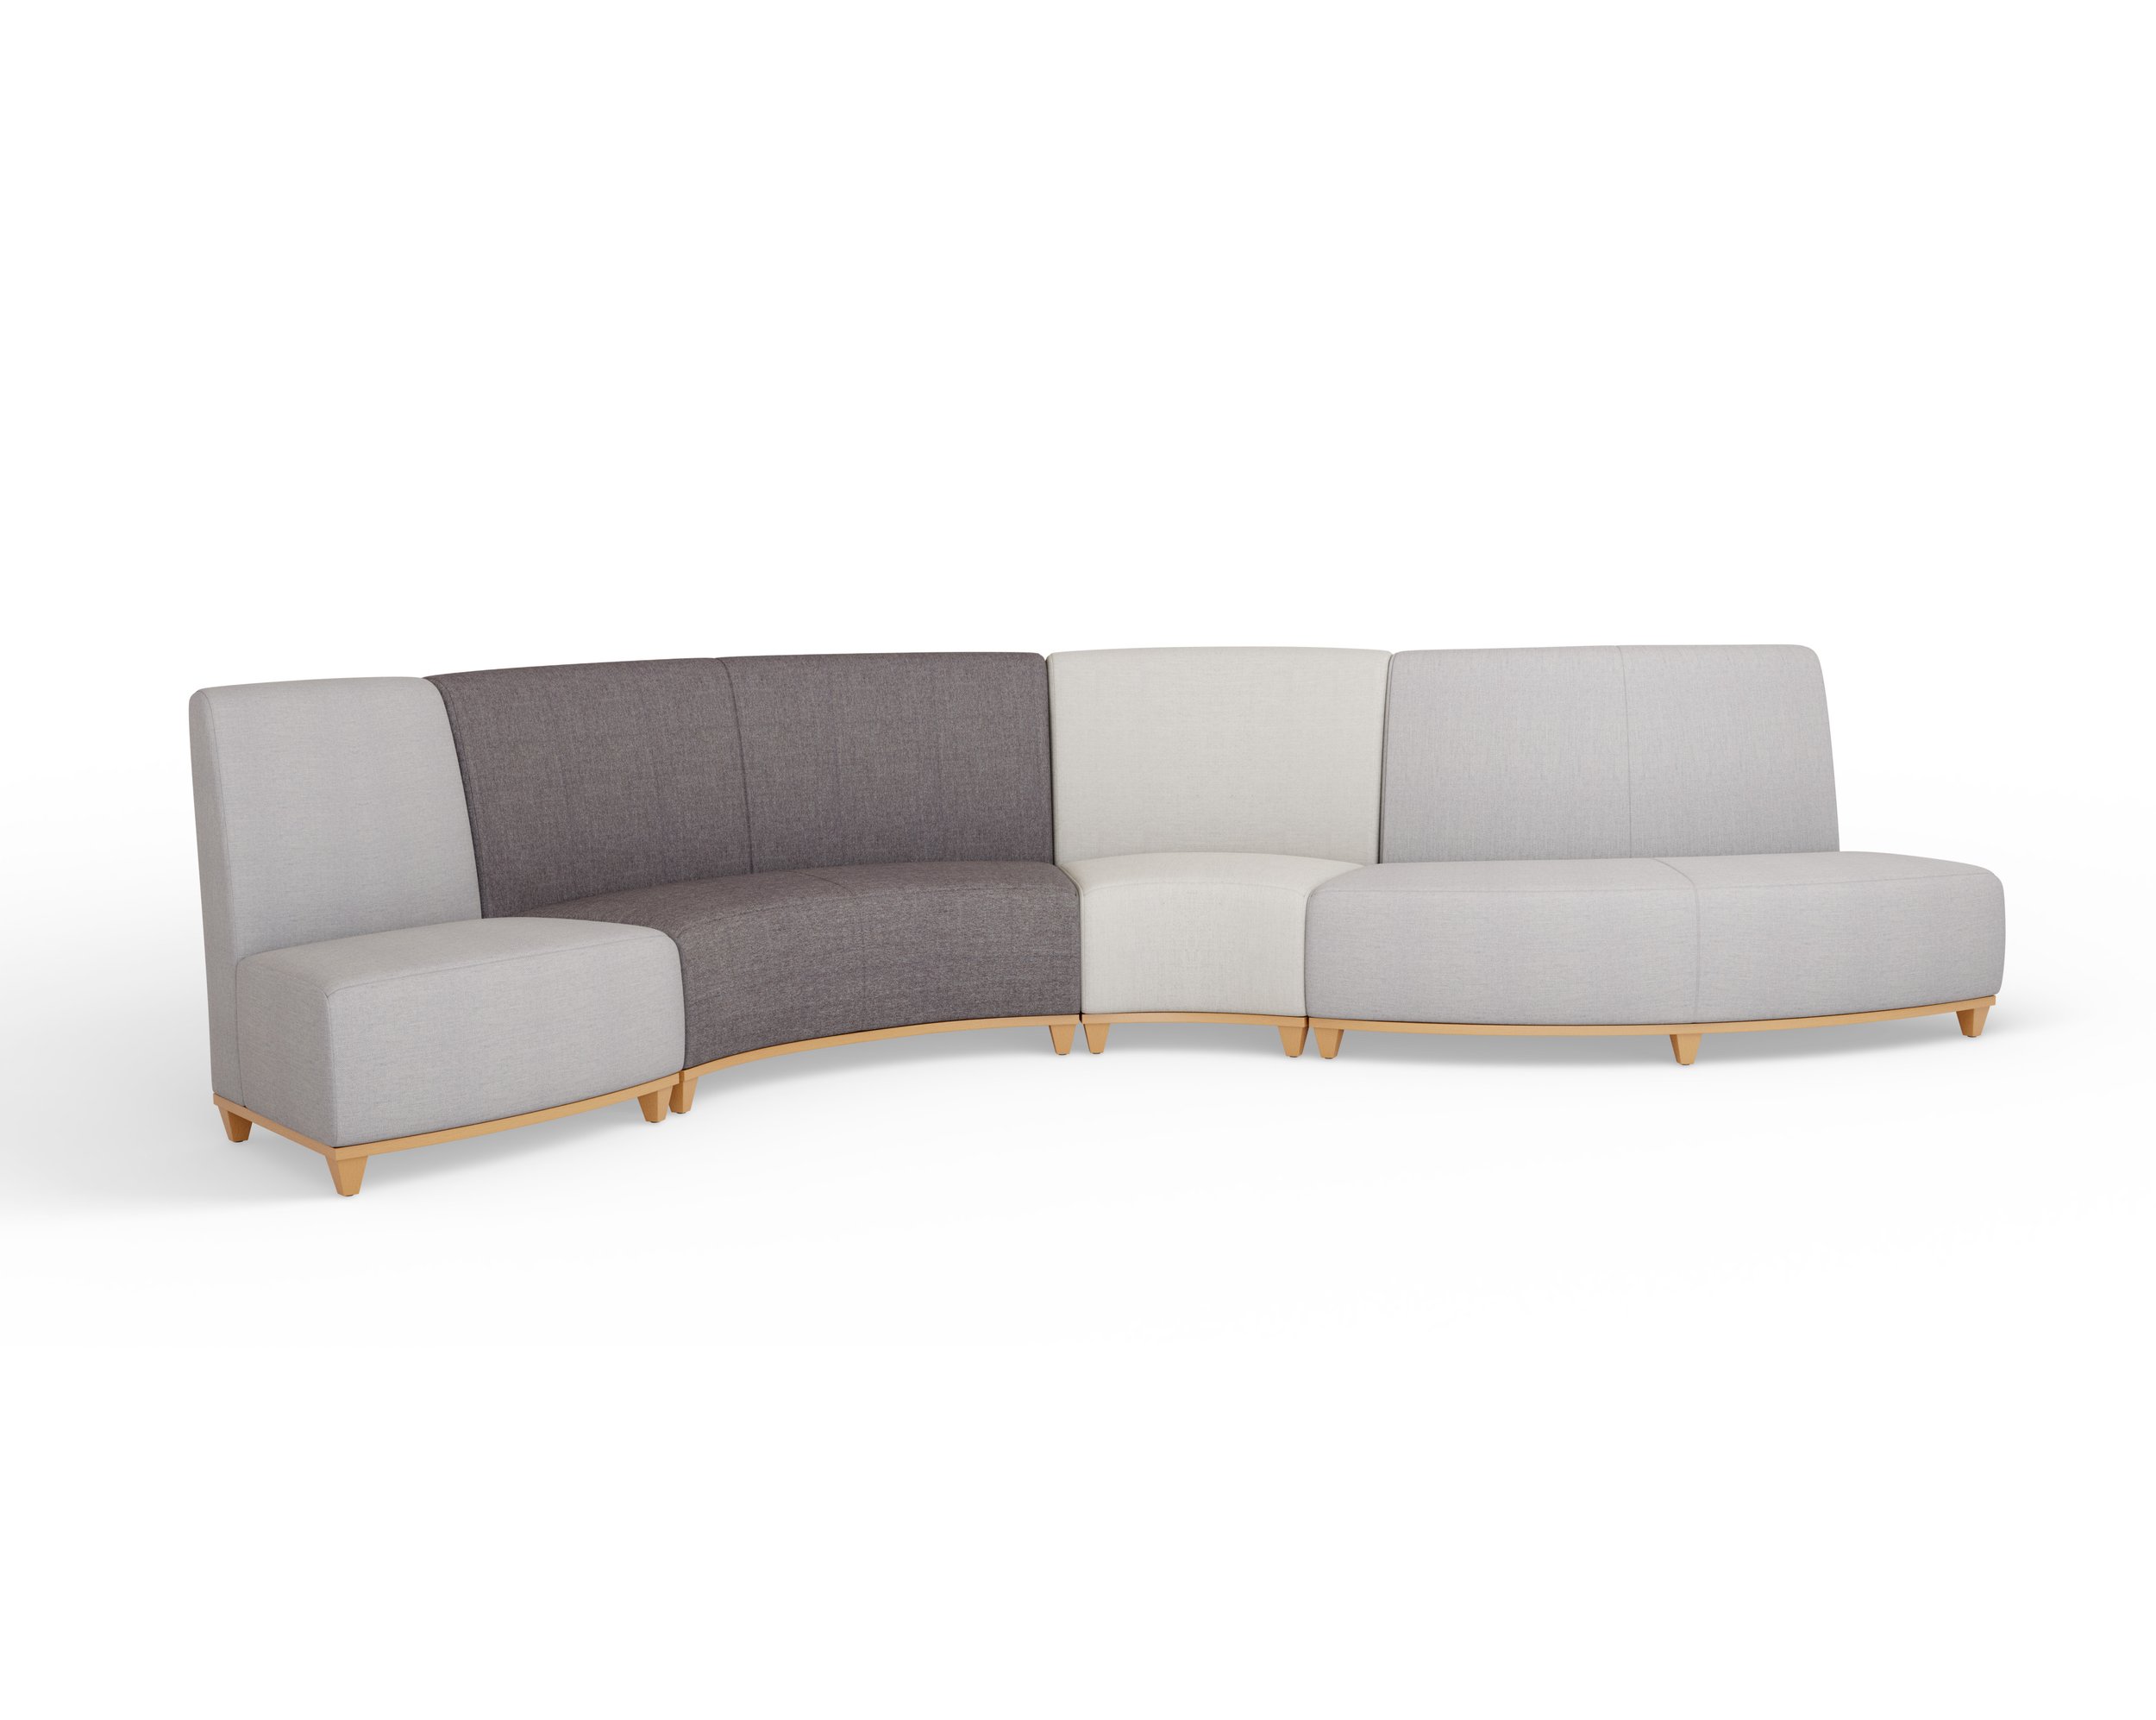 FROM LEFT: 9010-OC, 9010-2IC, 9010-IC, 9010-2OC IN KVADRAT MOLLY 2 0112, 0154, 0192 WITH WOOD LEGS IN HONEY BEECH 